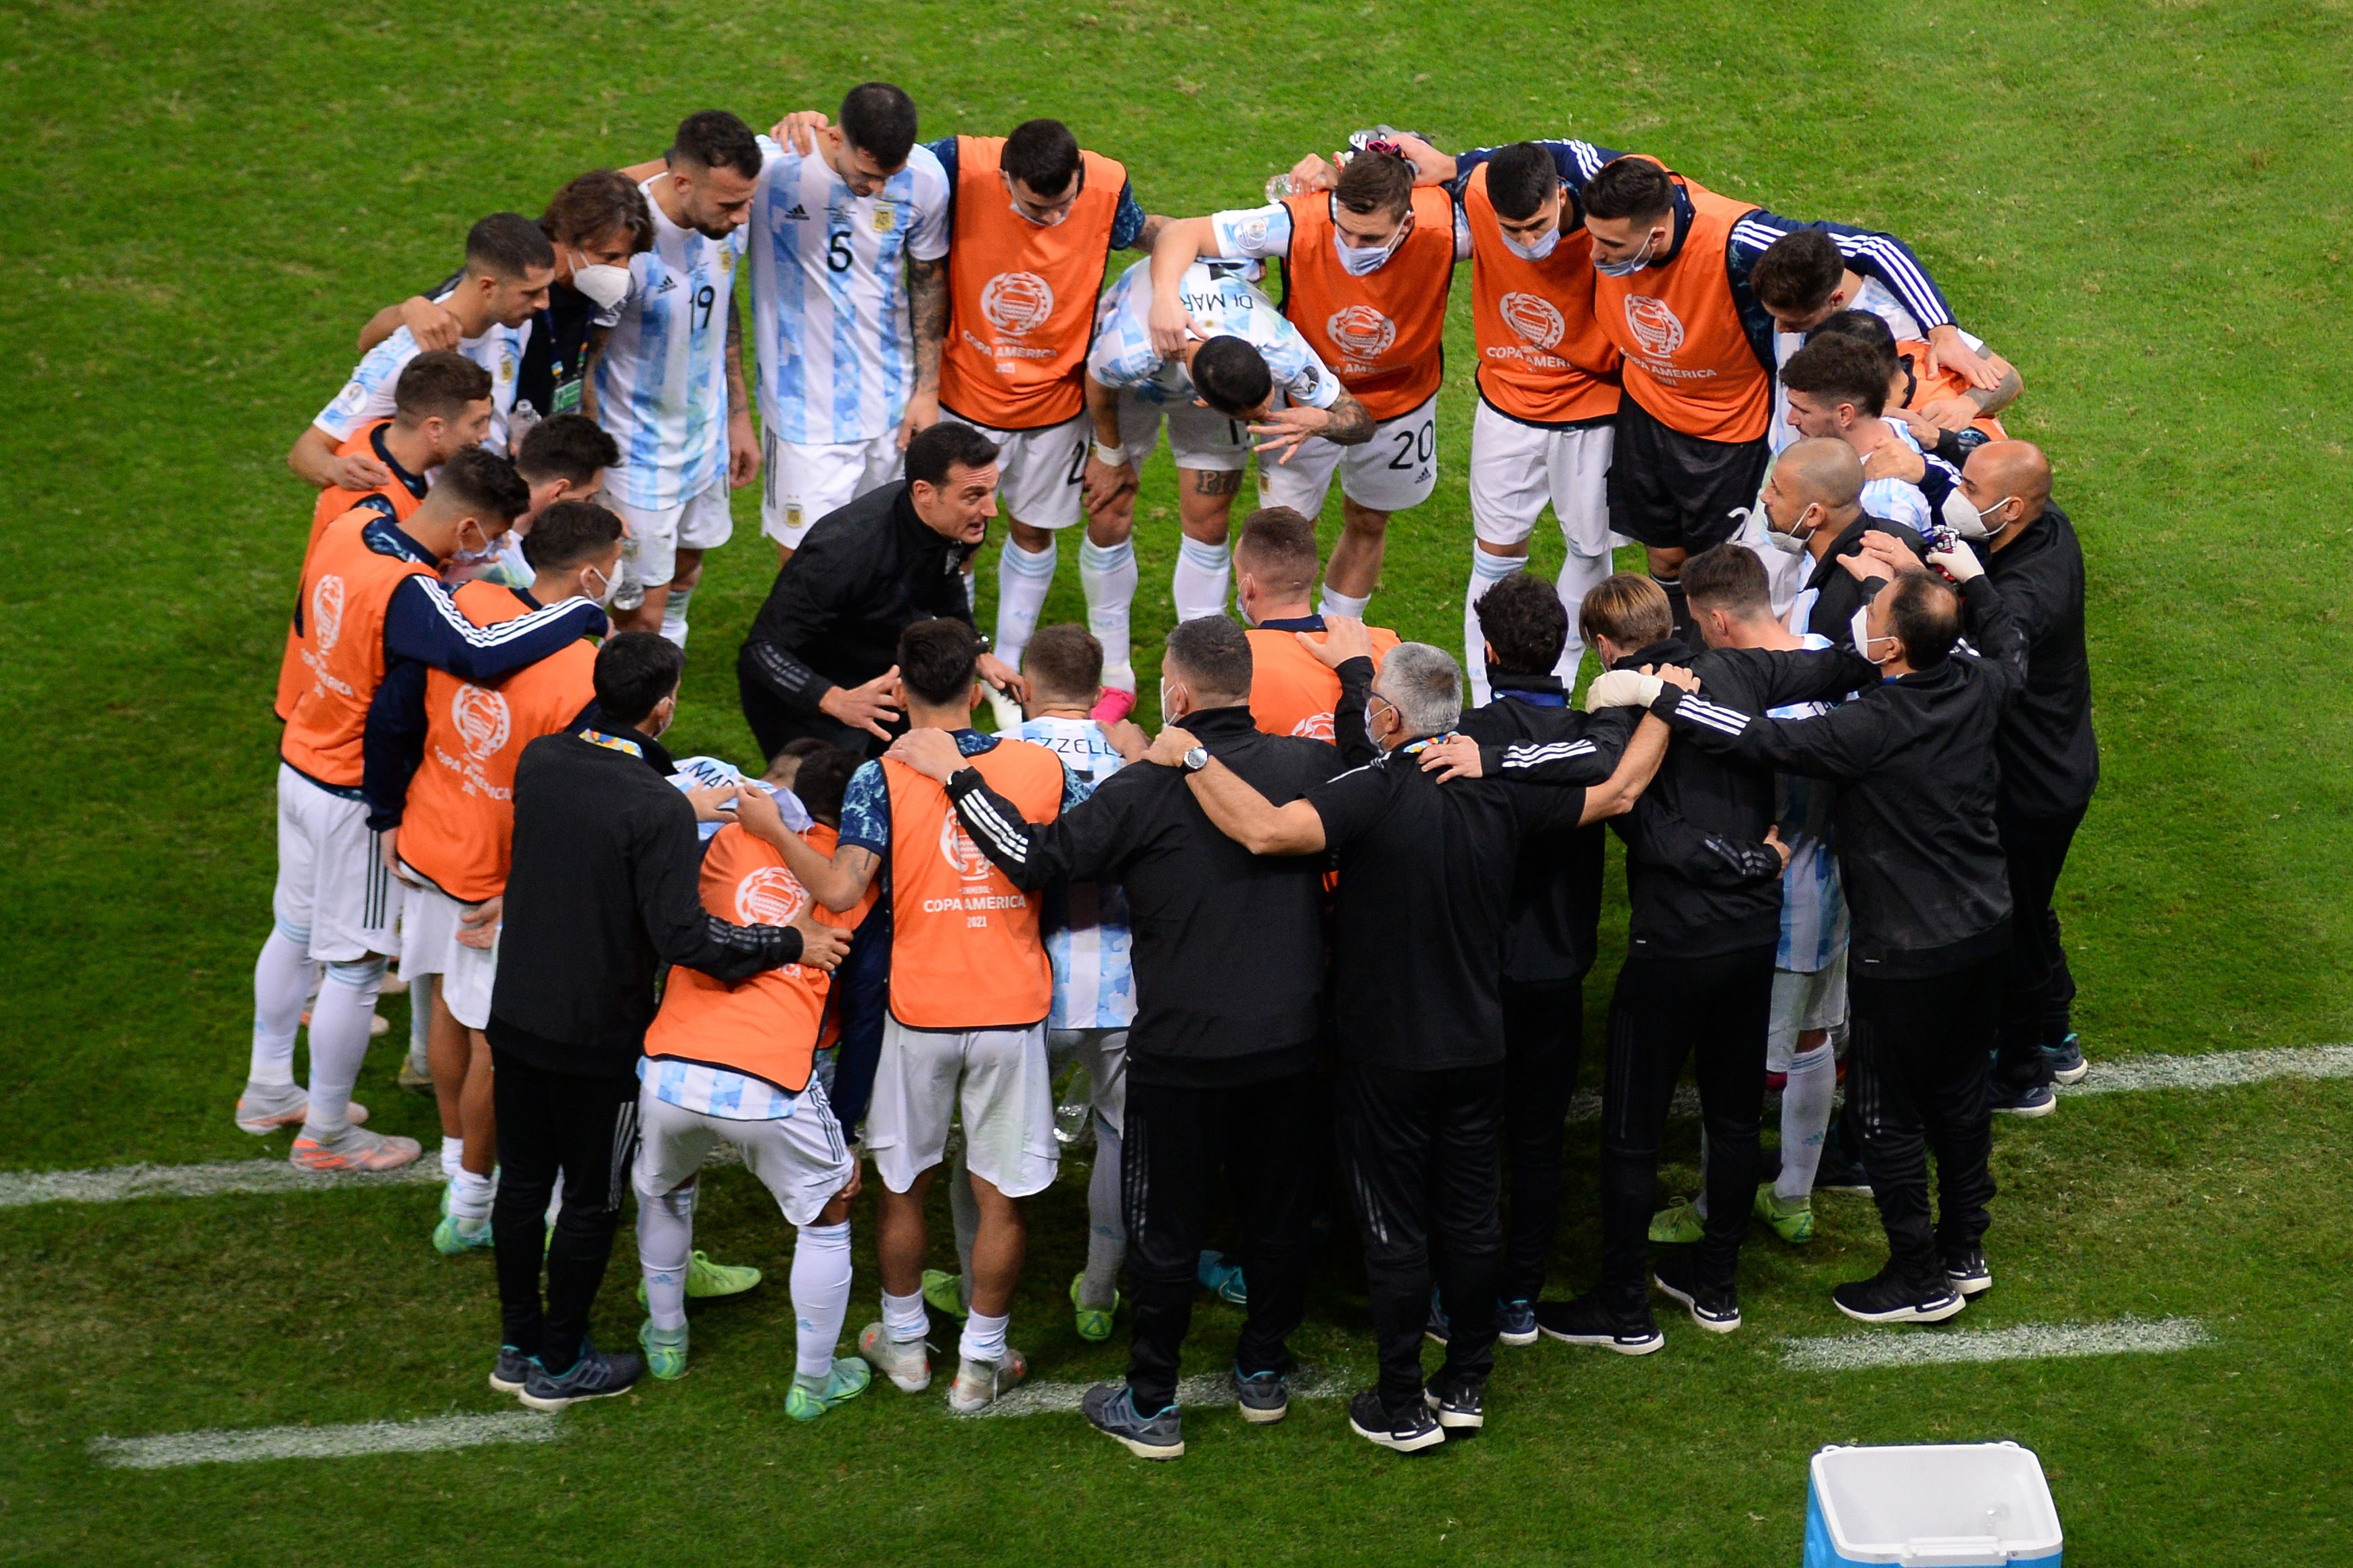 Head coach of Argentina Lionel Scaloni talks with his players before a shootout after a semi-final match of Copa America Brazil 2021 between Argentina and Colombia at Mane Garrincha Stadium on July 06, 2021 in Brasilia, Brazil.